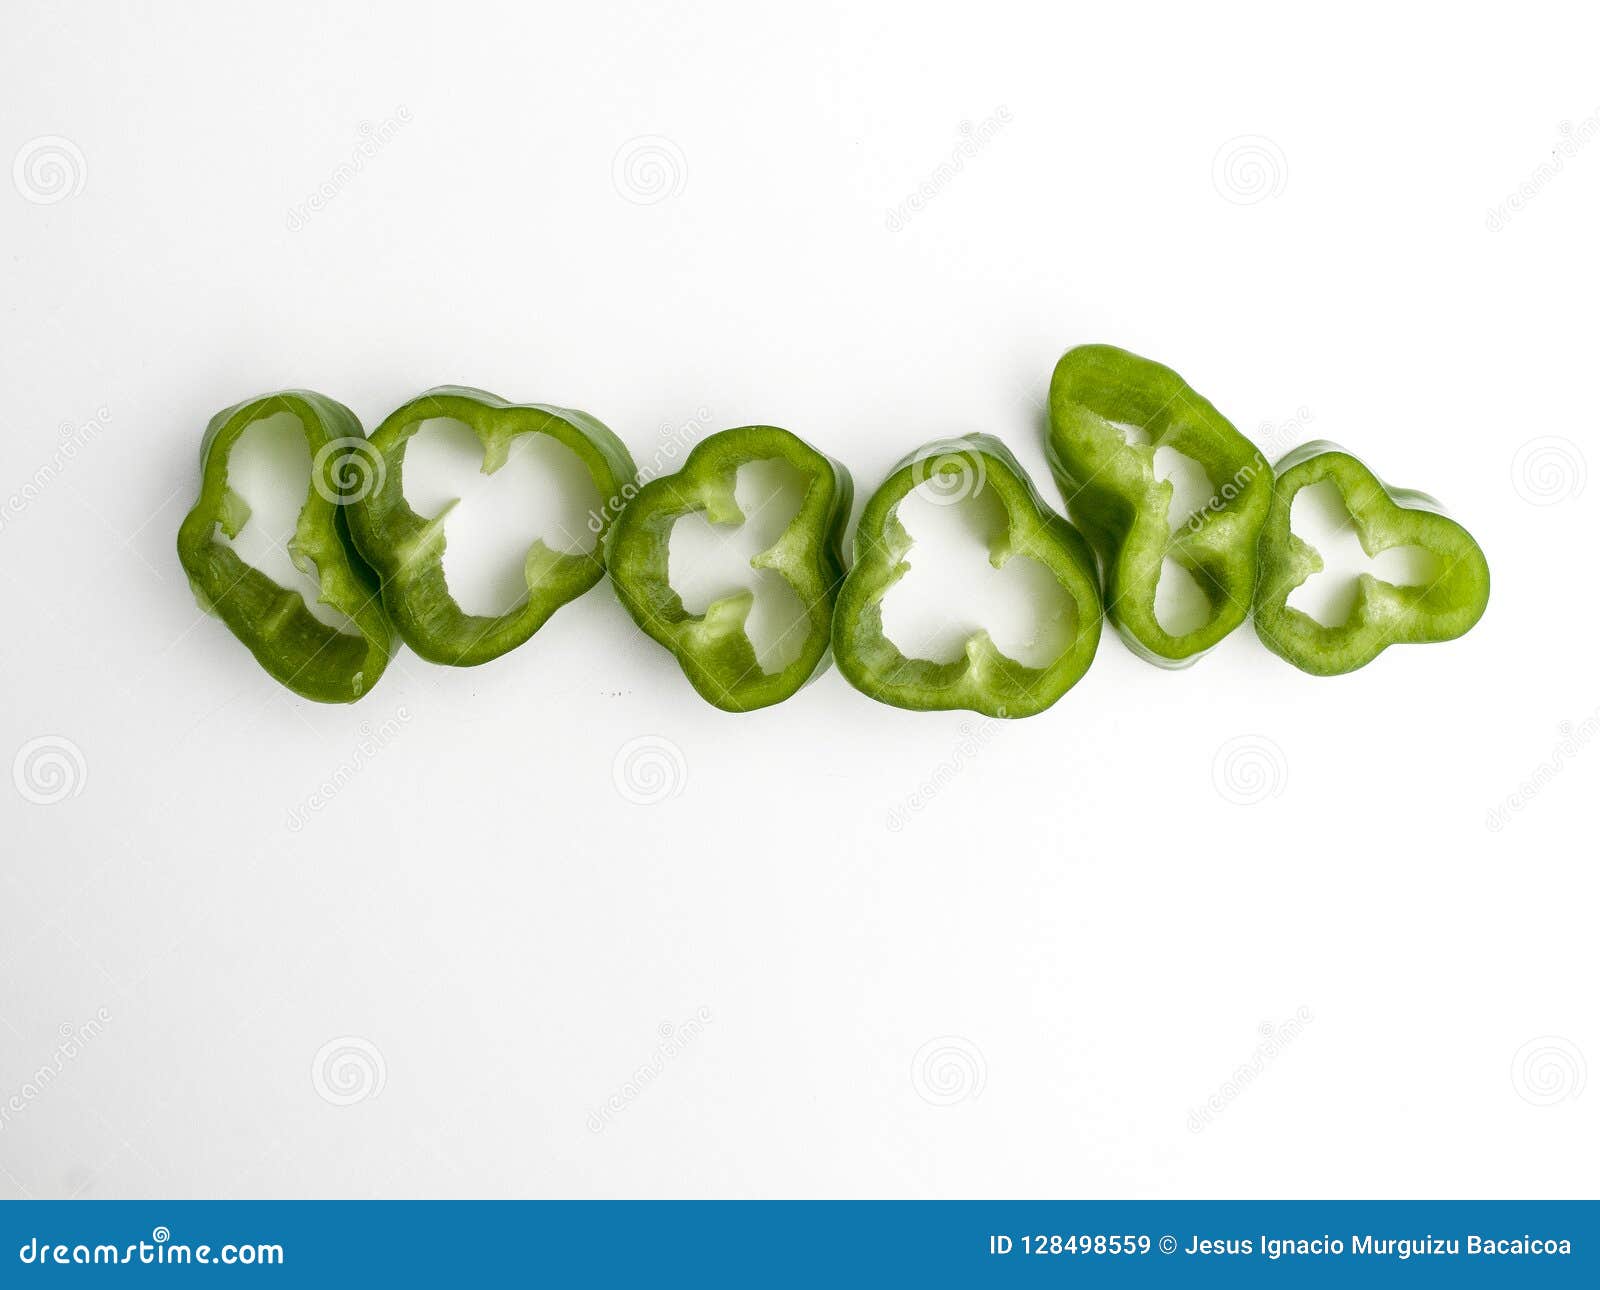 aerial view of a row of slices cut from a green pepper